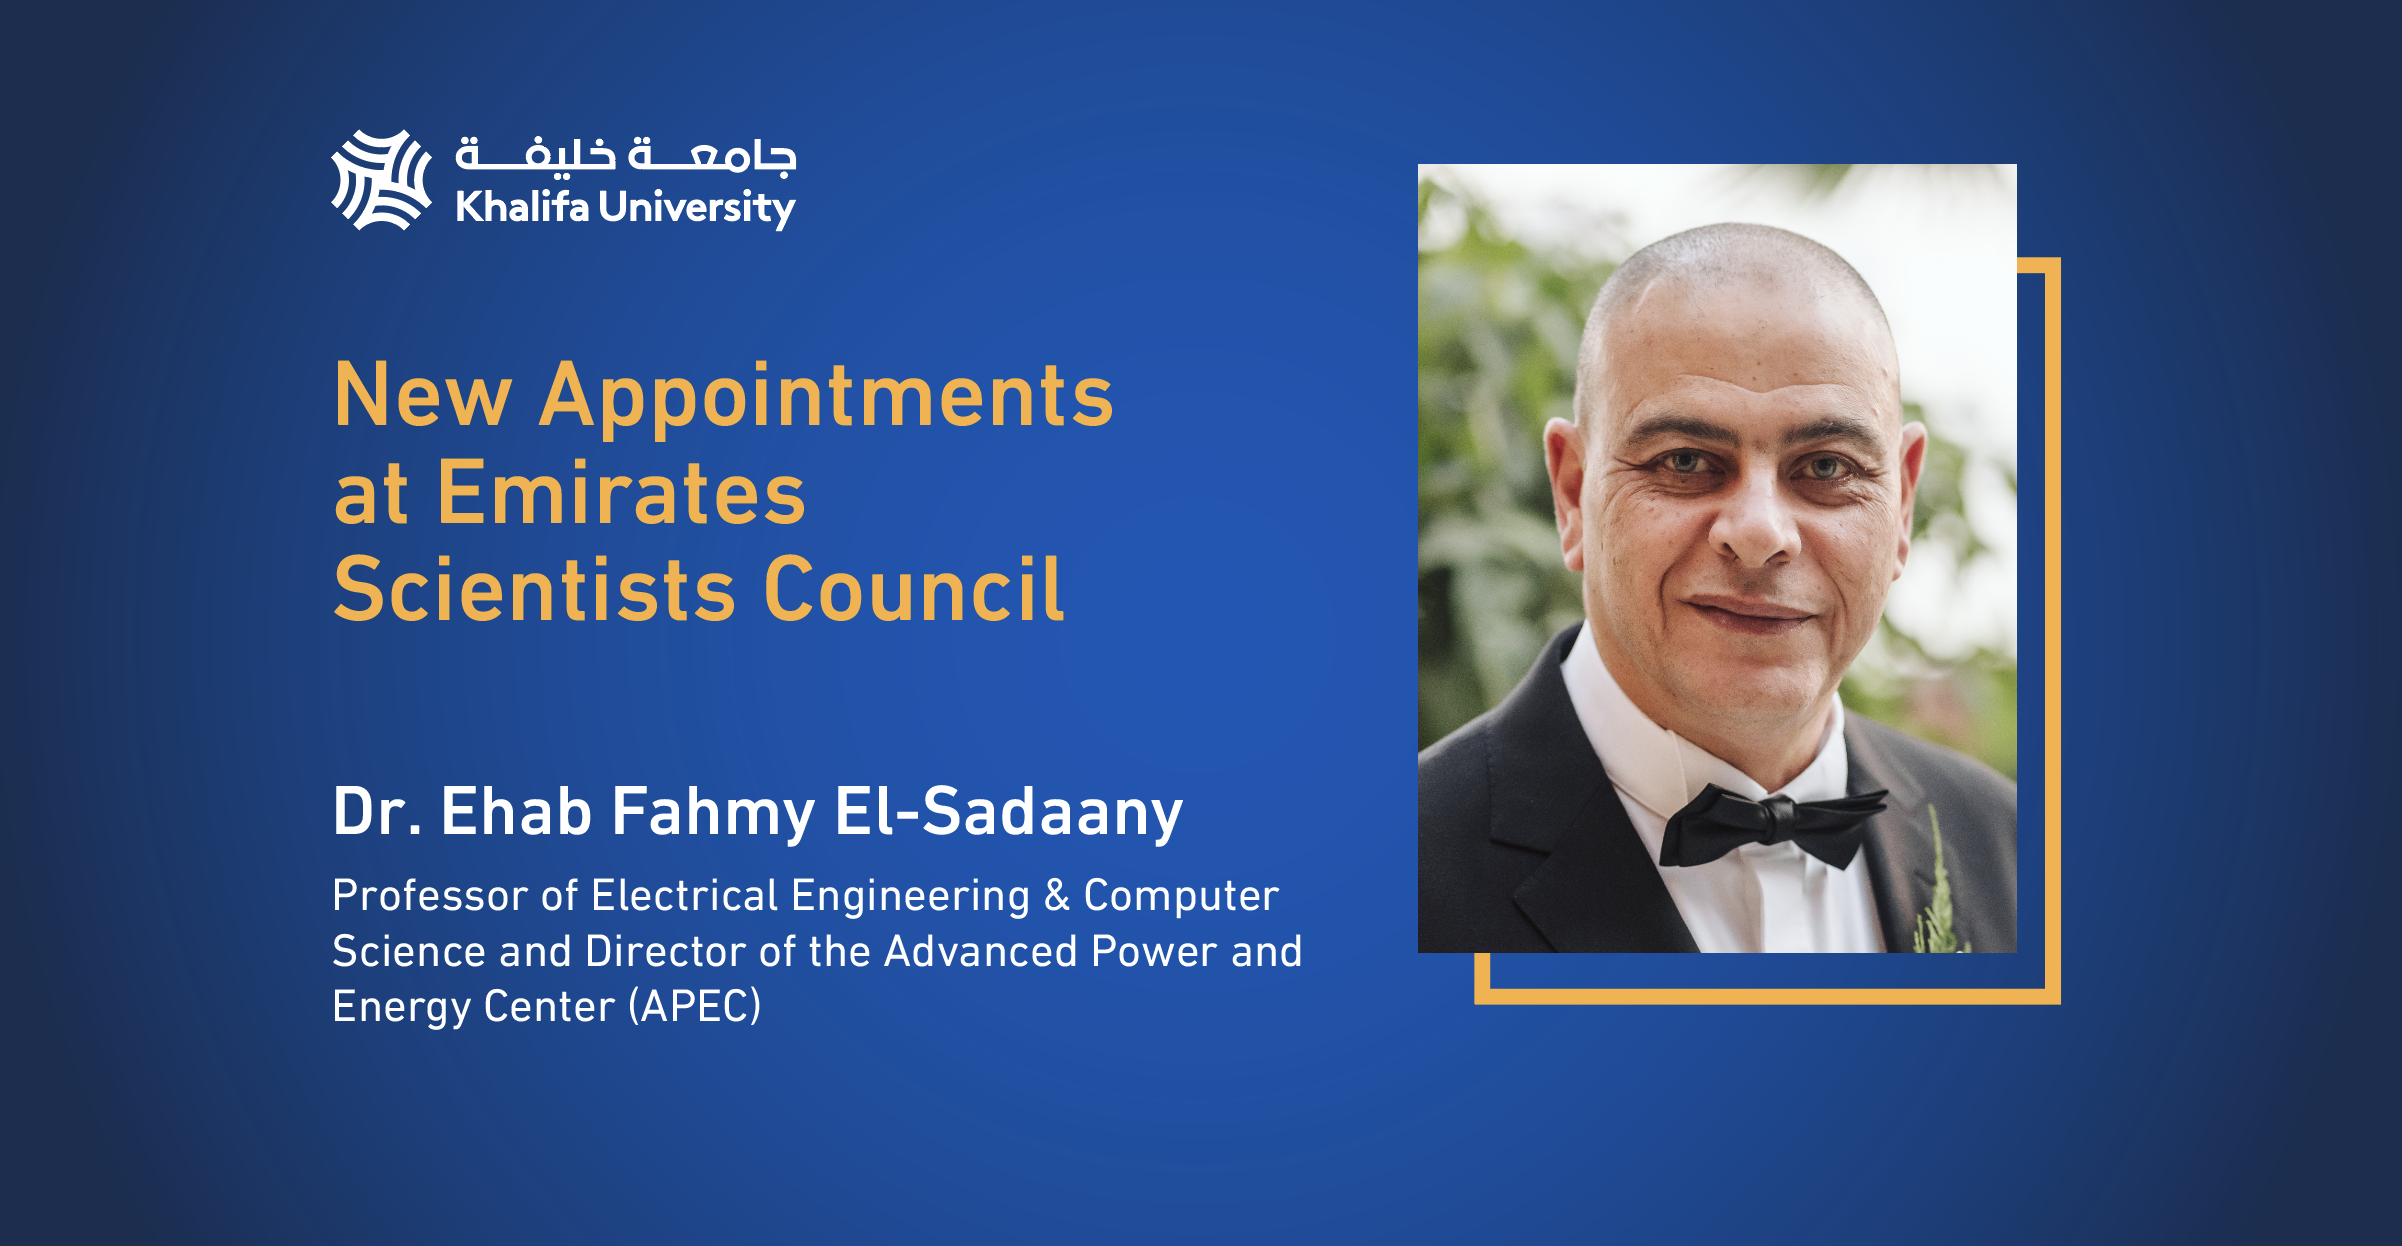 Dr. Ehab El-Sadaany Receives New Appointments at Emirates Scientists Council